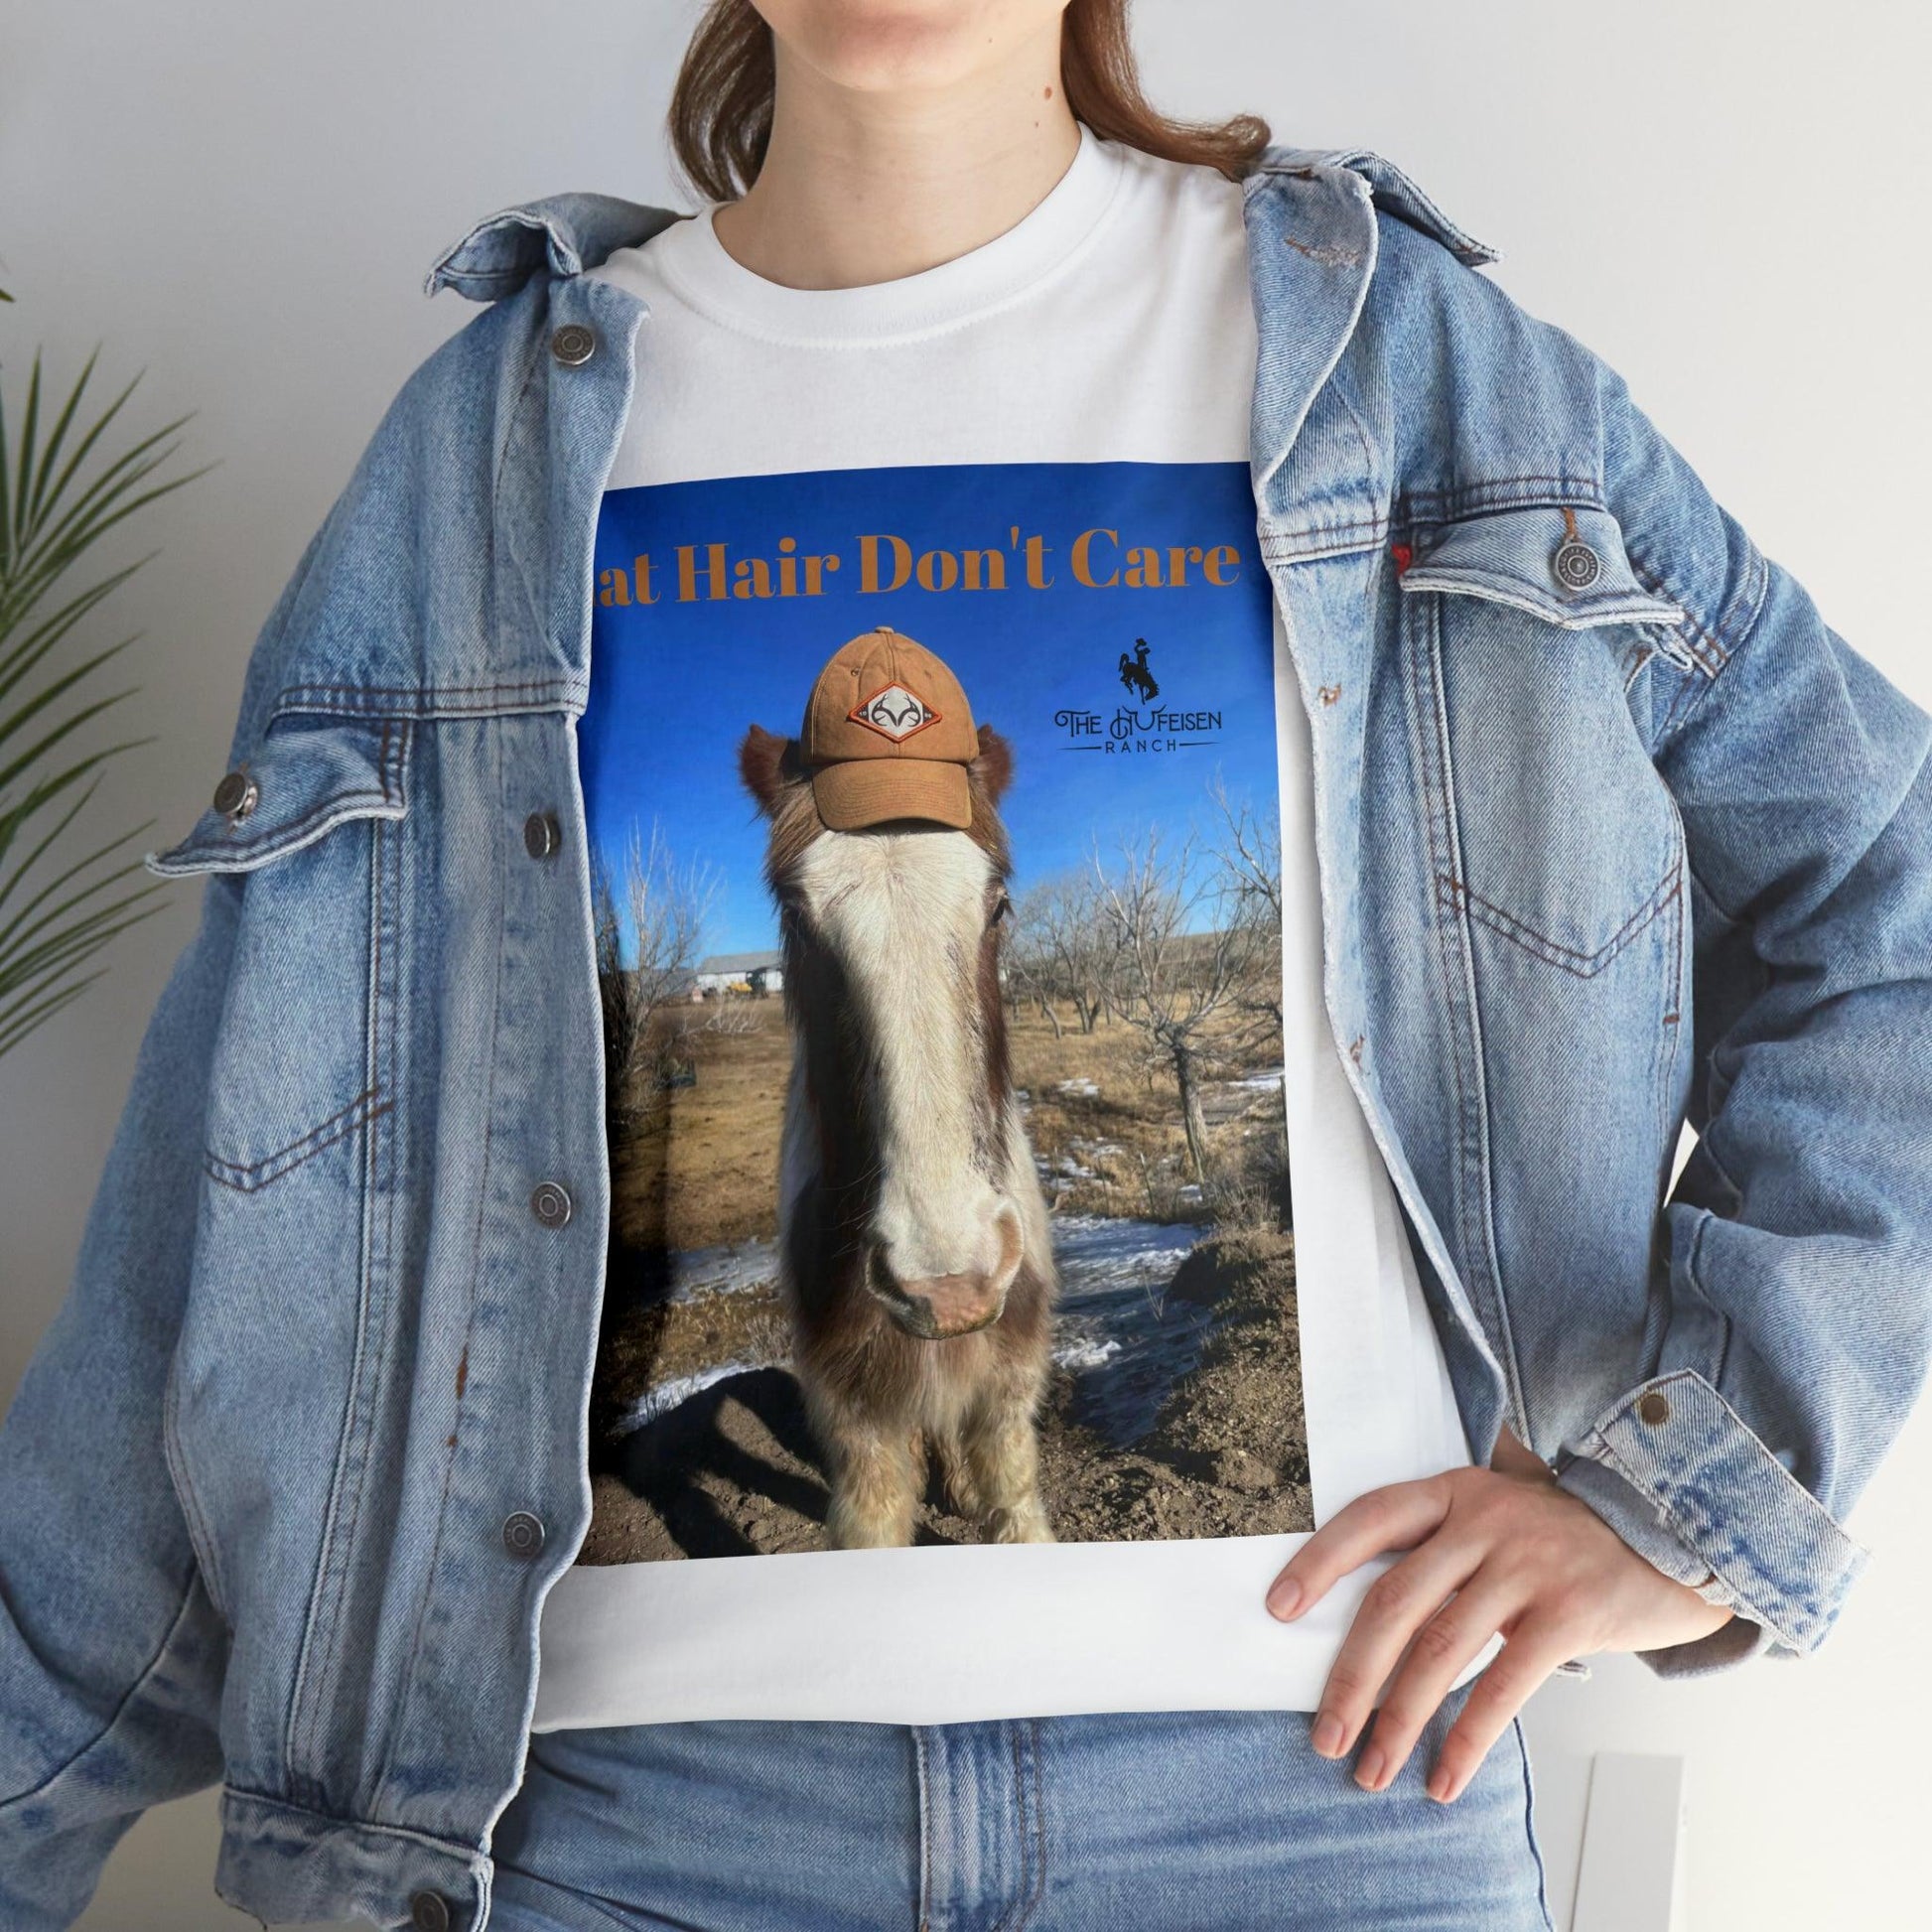 Hat Hair Don’t Care Heavy Cotton Tee - The Hufeisen-Ranch (WYO Wagyu)